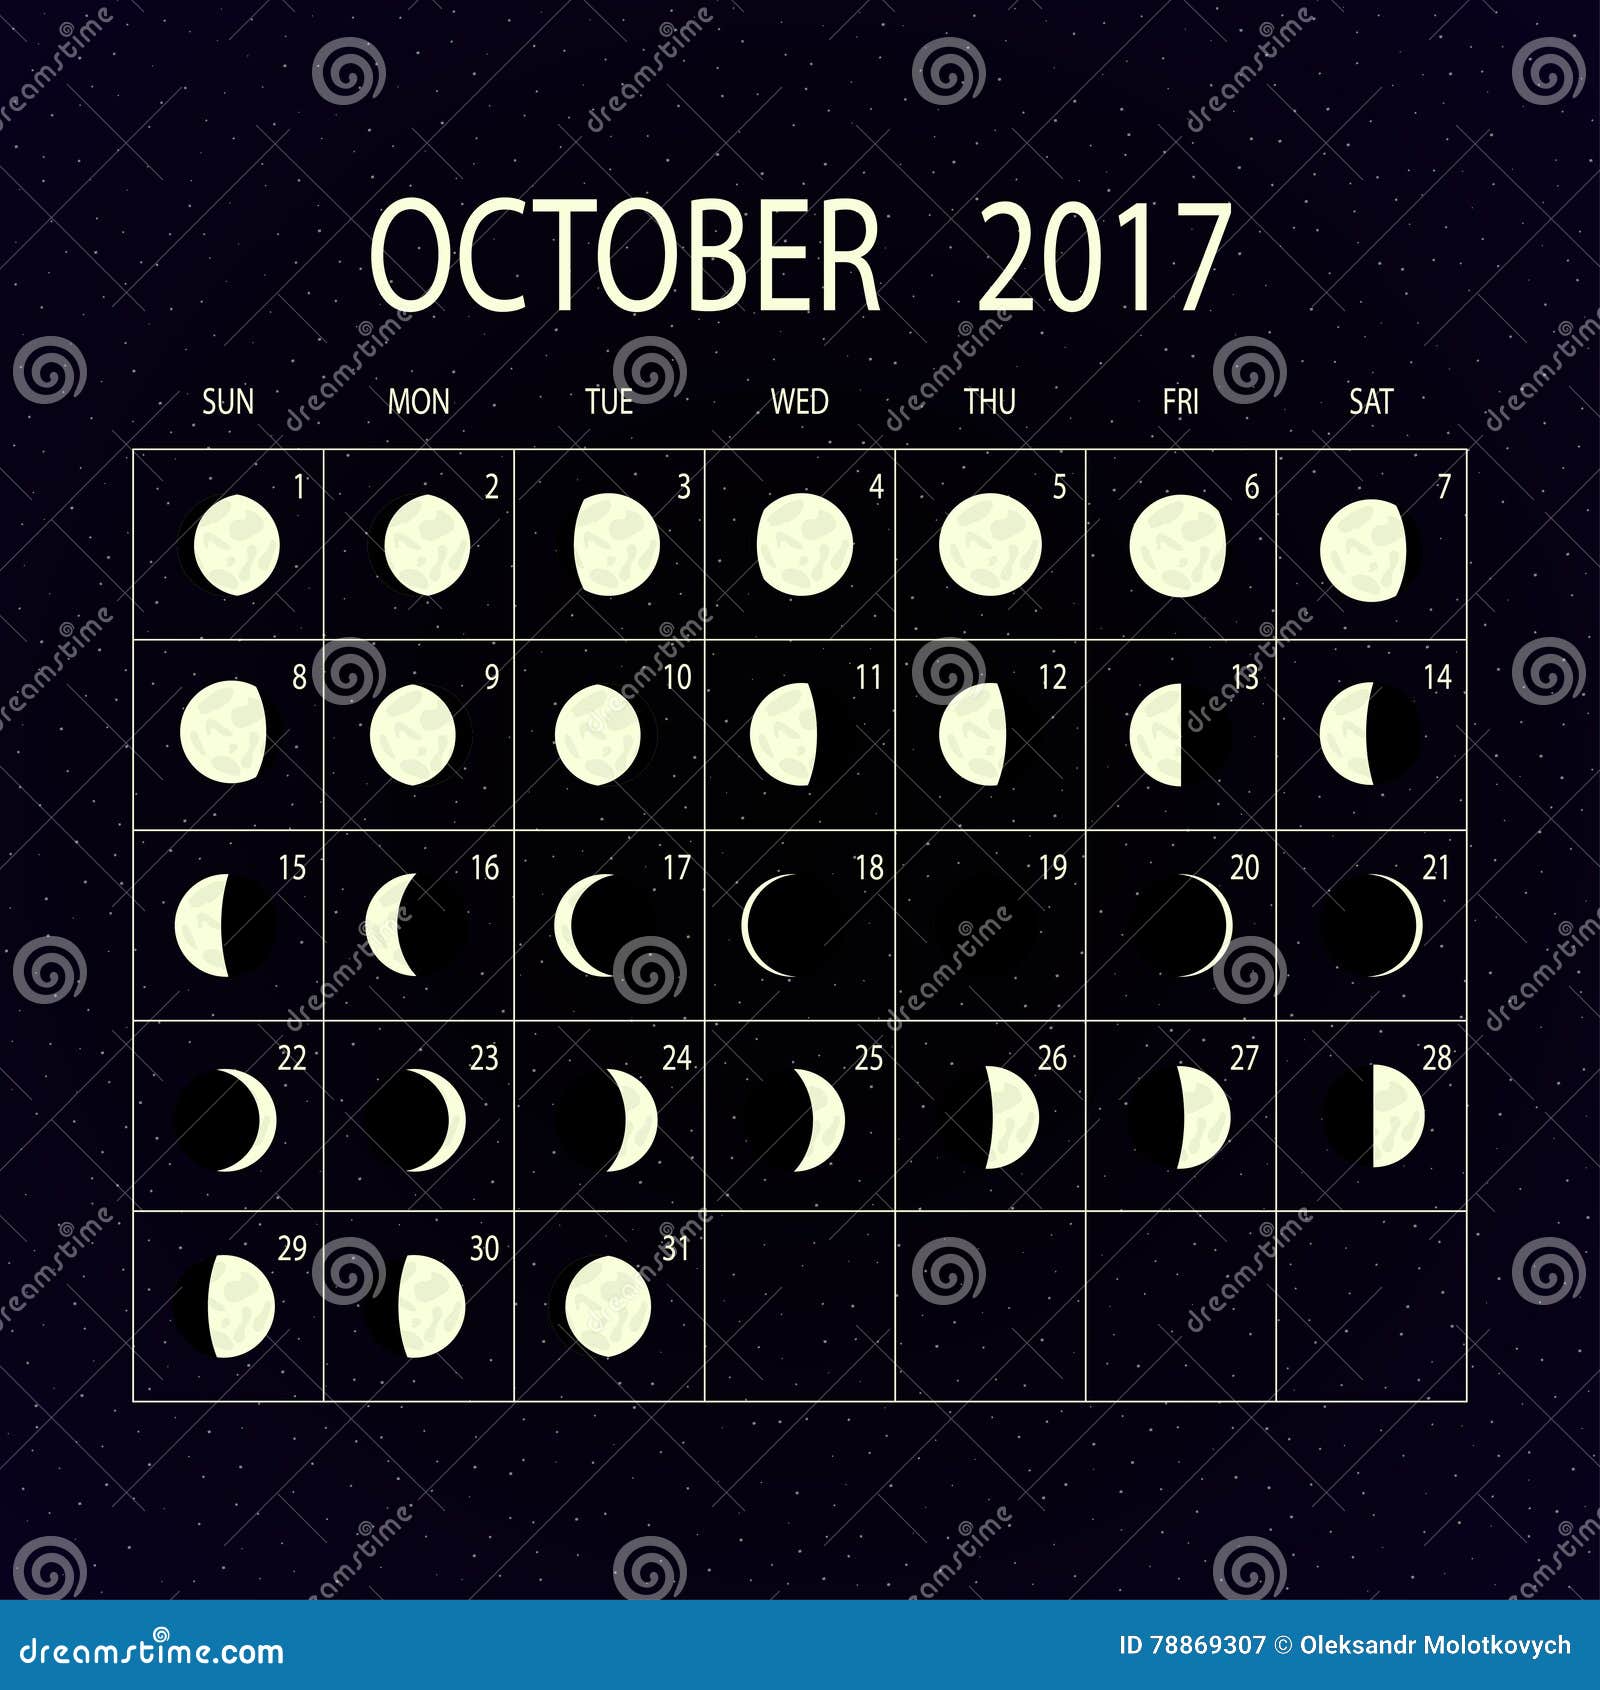 Moon Phases Calendar For 2017 October Vector Illustration Stock Vector Illustration Of Monthly Calendar 78869307